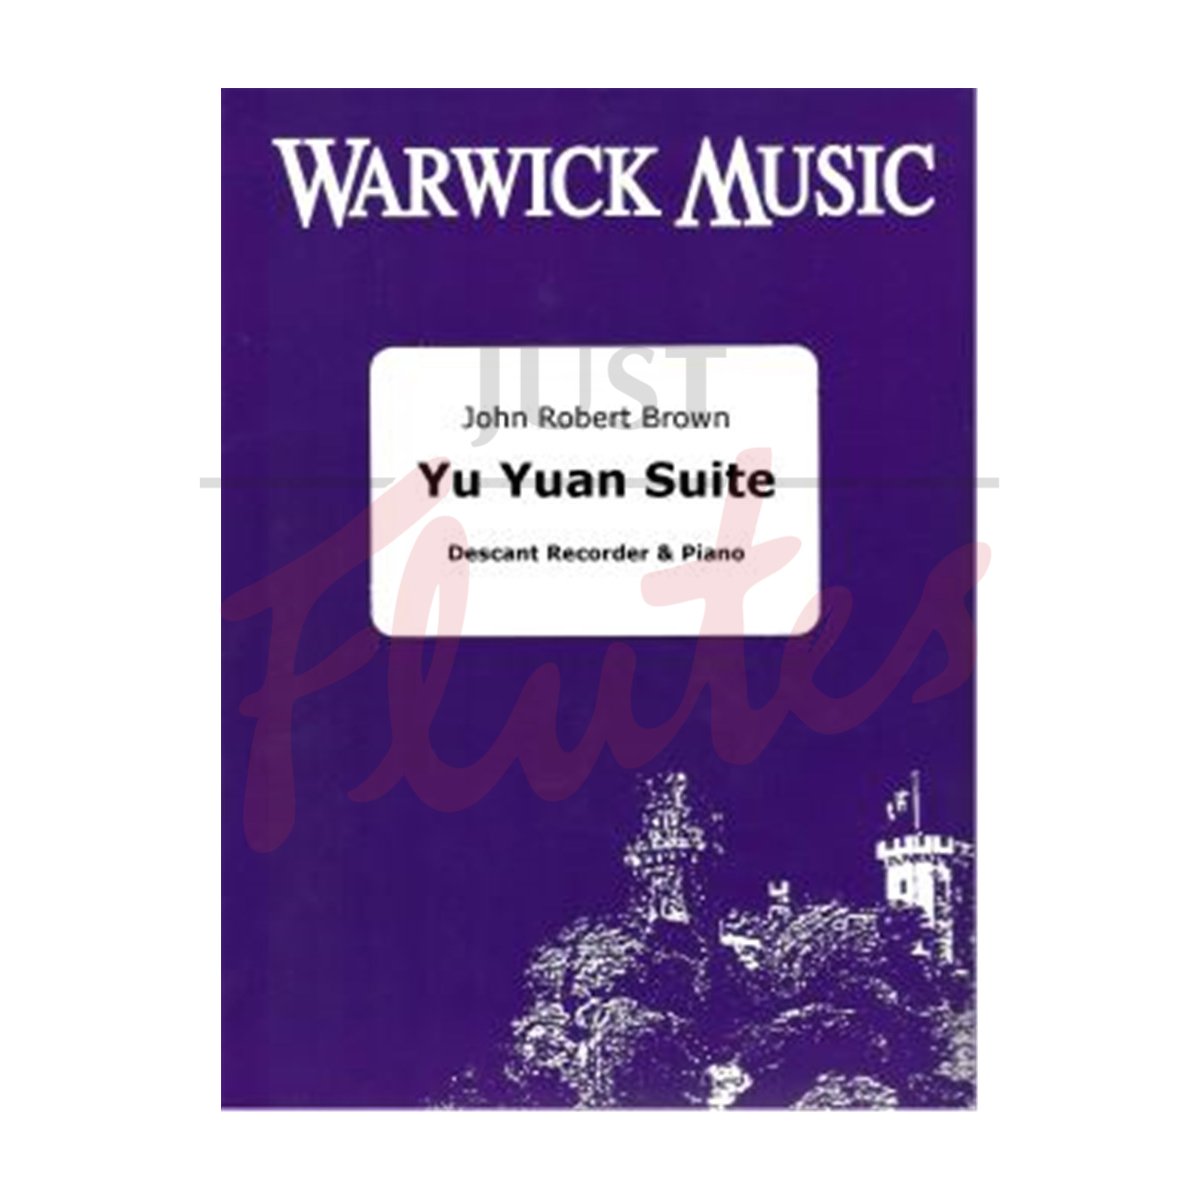 Yu Yuan Suite for Descant Recorder and Piano